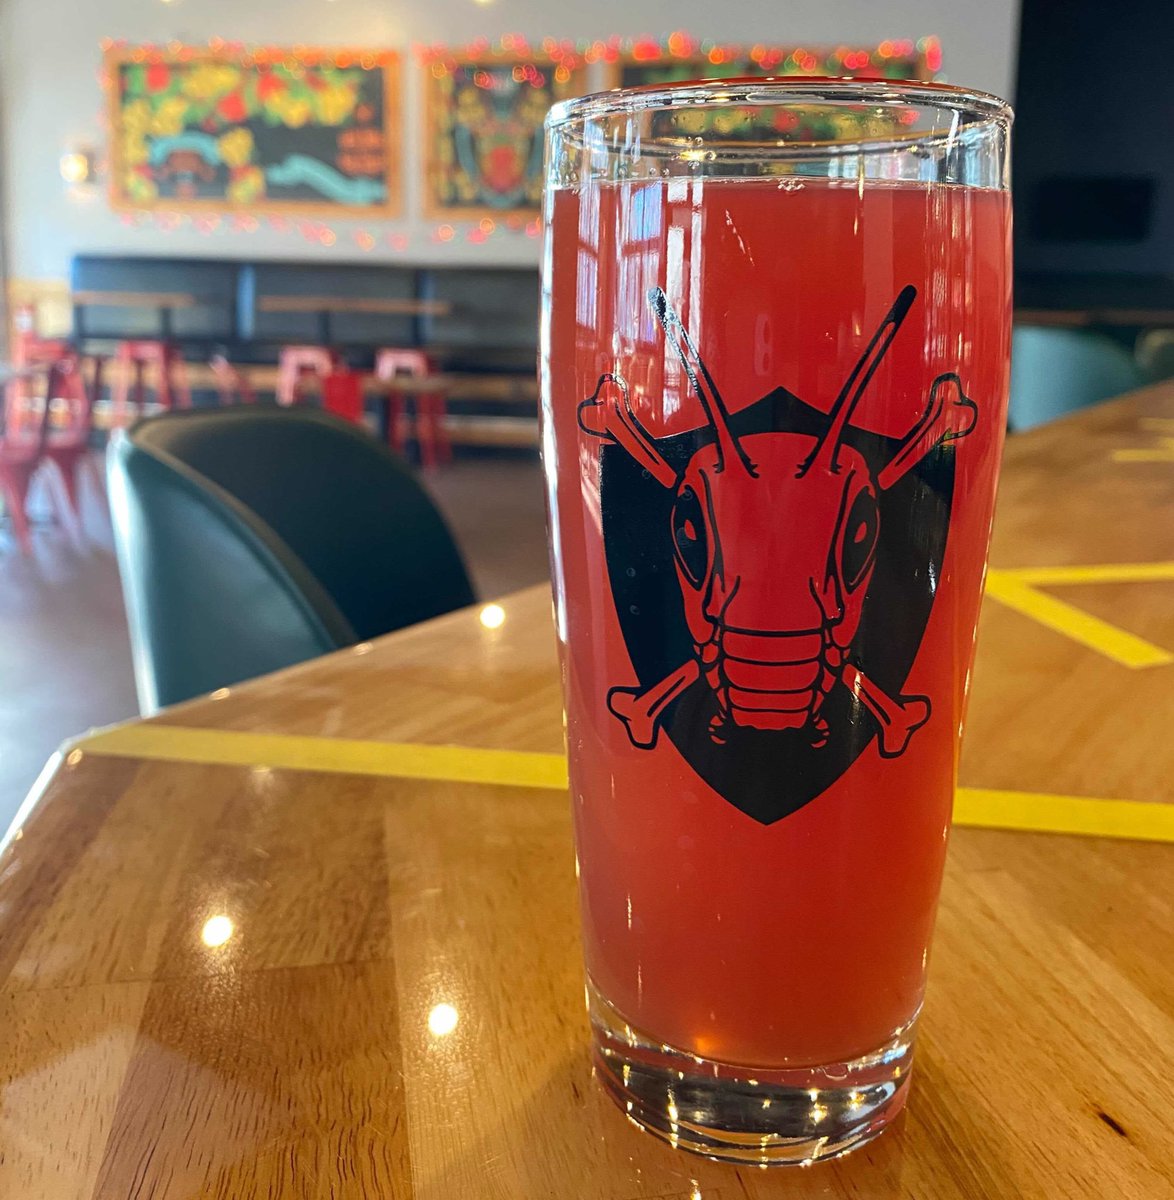 #Newontap: BLOOD ORANGE CRANBERRY! This off-dry blend of #apples, #bloodorange & #cranberries is tart & juicy with a raspberry-like flavor. Enjoy a taste or pint outdoors, swing by for #takeout or #orderonline for pickup!
#limitedrelease #bloodorangecranberrycider #hardcider